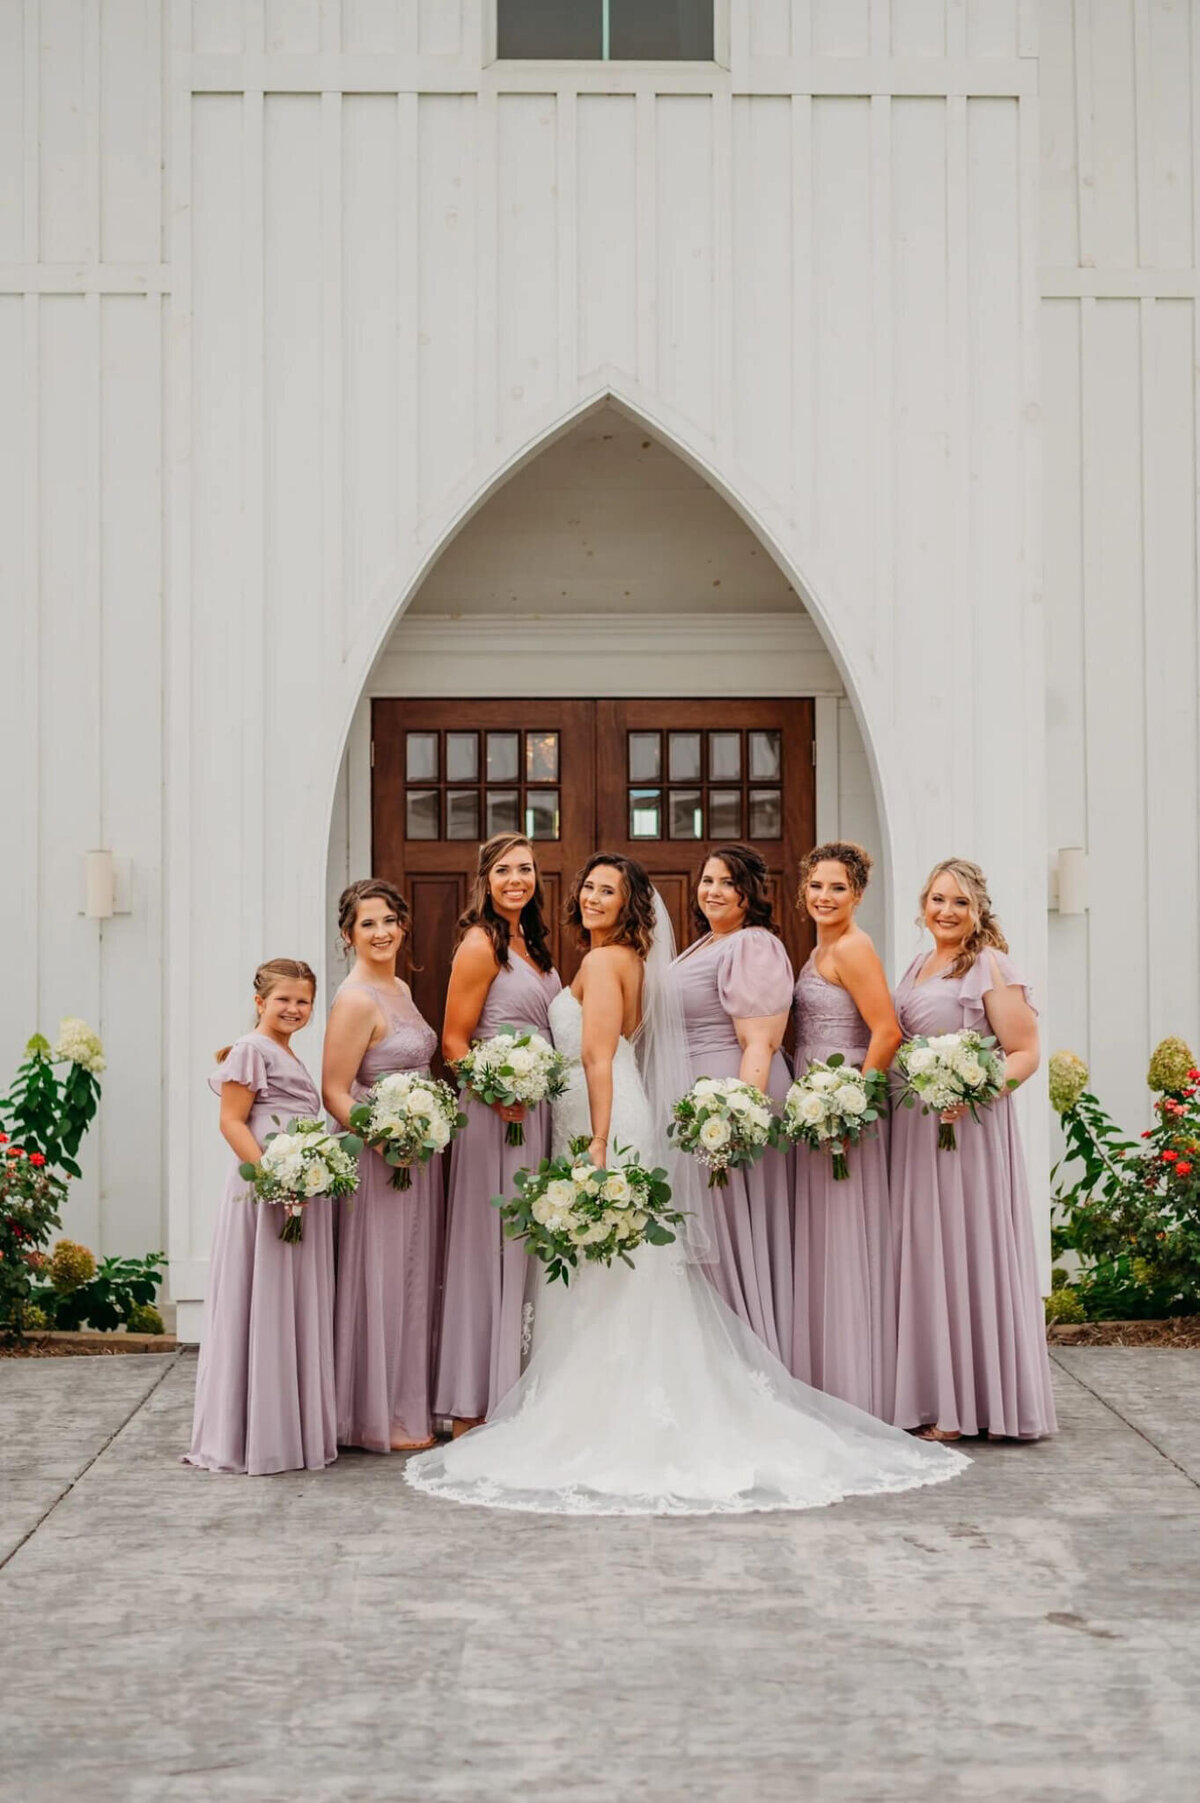 Photo of a bride and her bridesmaids, and lavender, in front of a white building and wooden doors